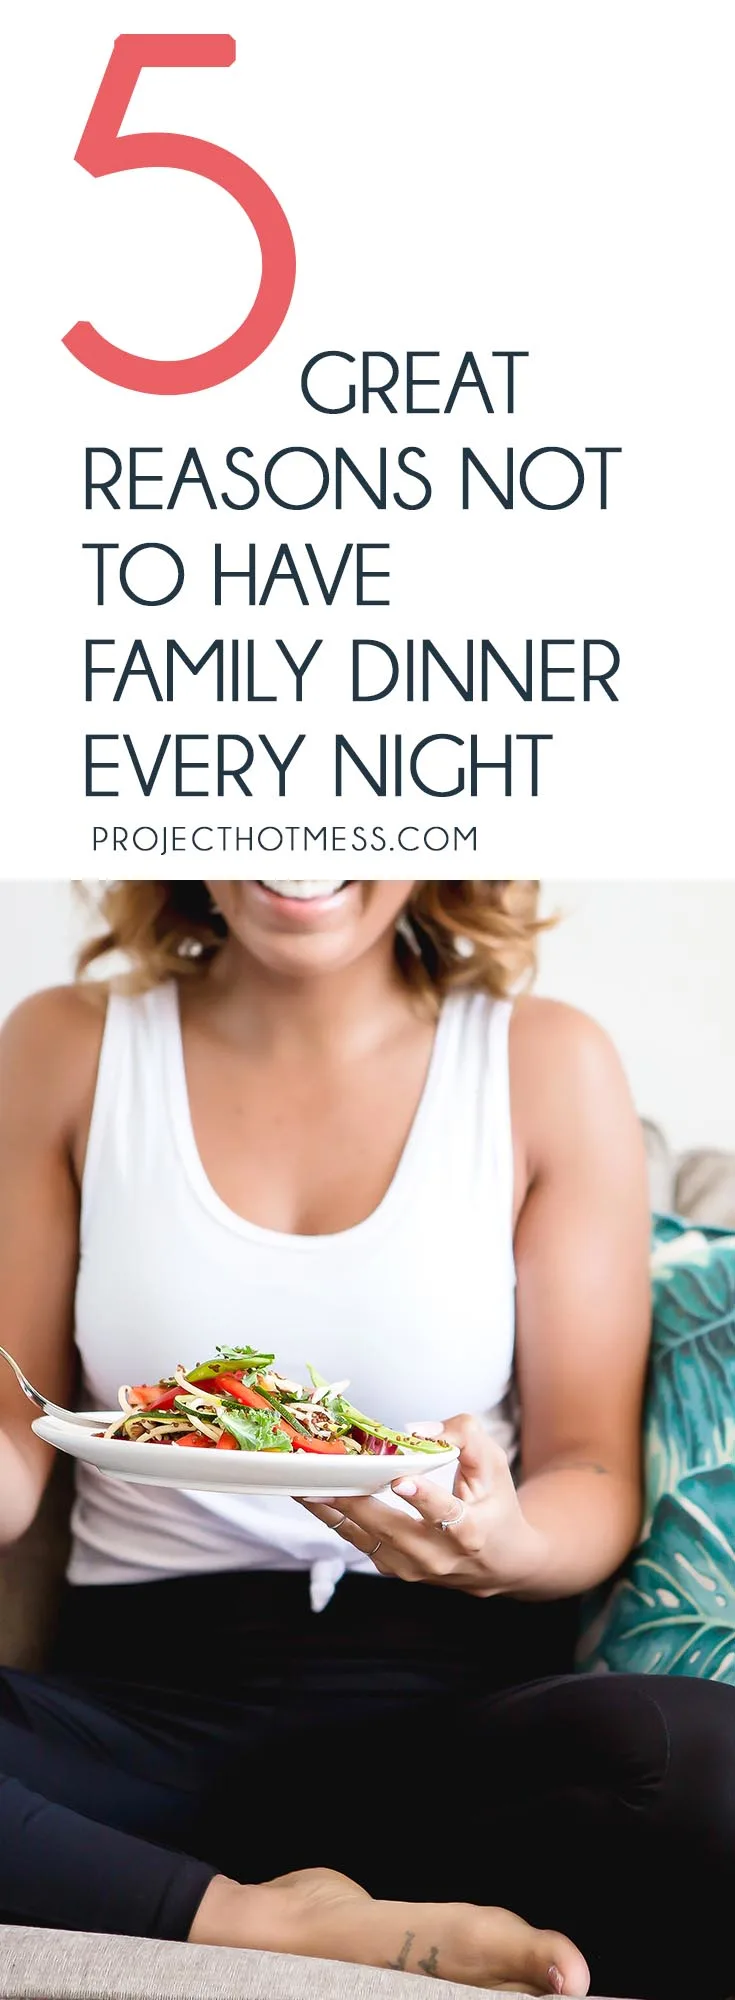 Do you feel guilty for not having family dinner every night? Stop! There are great reasons why you should give yourself a break and not do this every night.   Family Dinner | Family Cooking | Family Dinner Every Night | Family Time | Eating Together | Families Eat Together | Parenting | Parenting Tips | Surviving Motherhood | Family Tips 